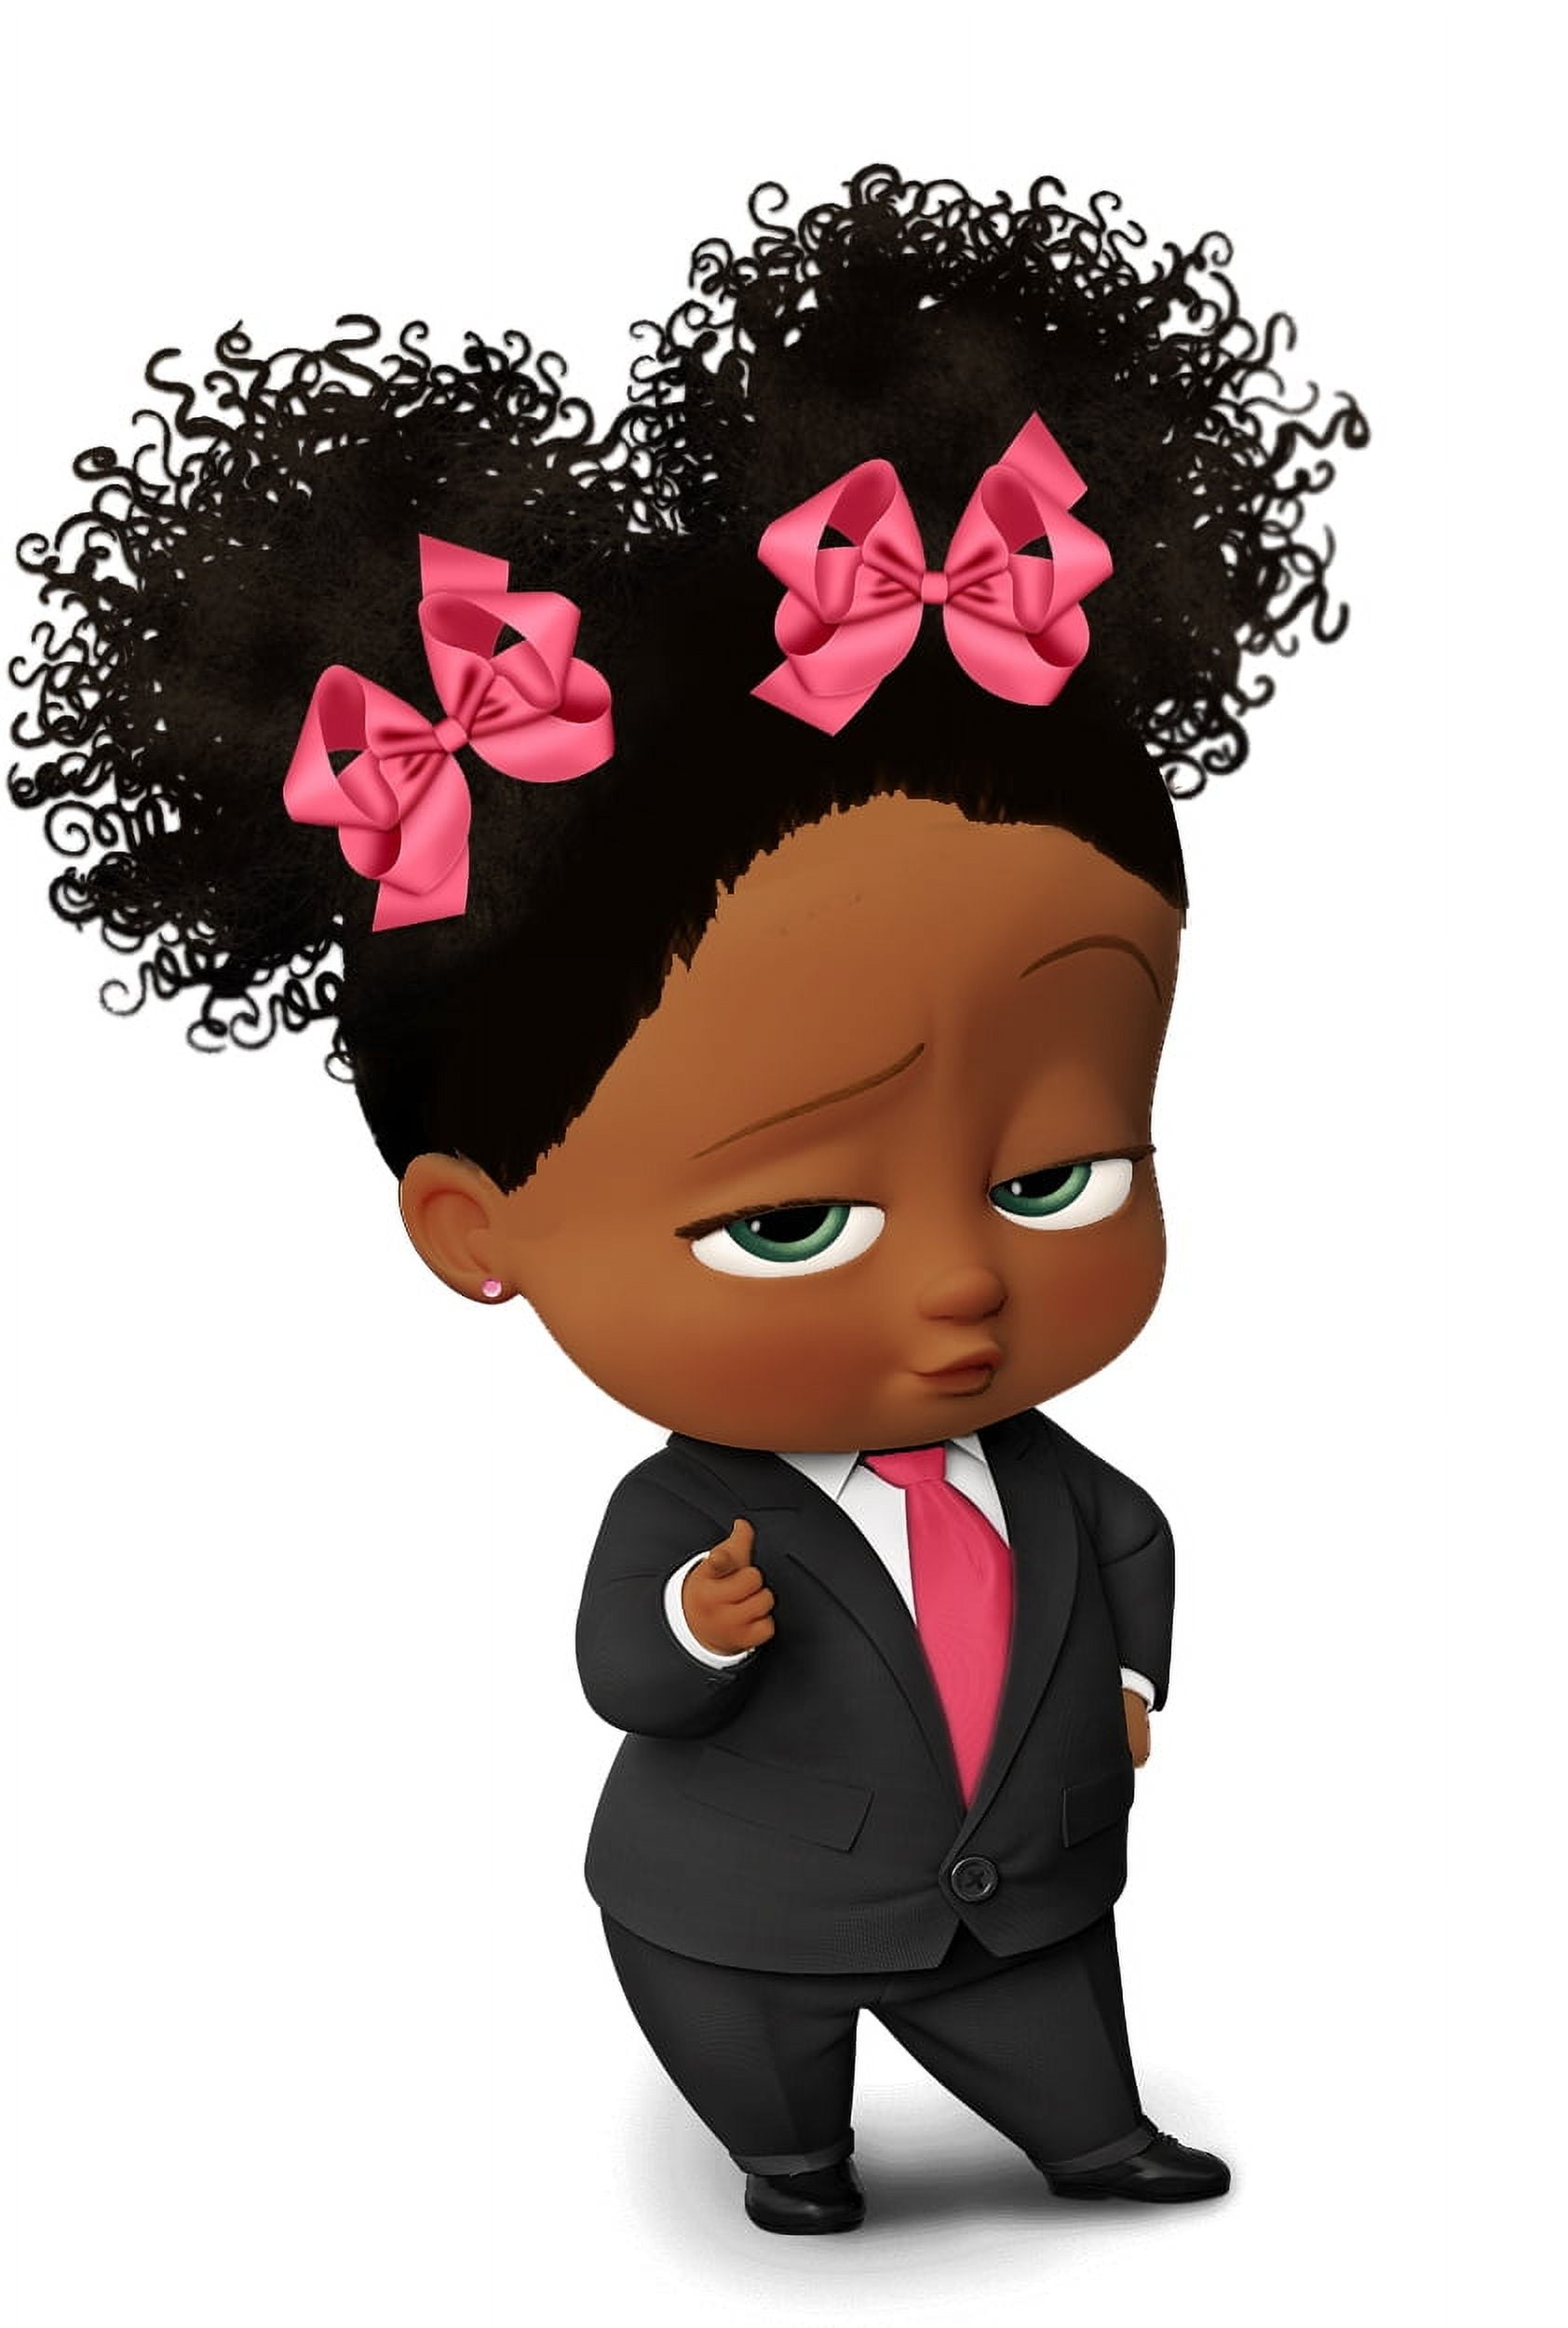 African American Girl Boss Baby Pink Bows Edible Cake Topper Image 1/4  sheet ABPID27726